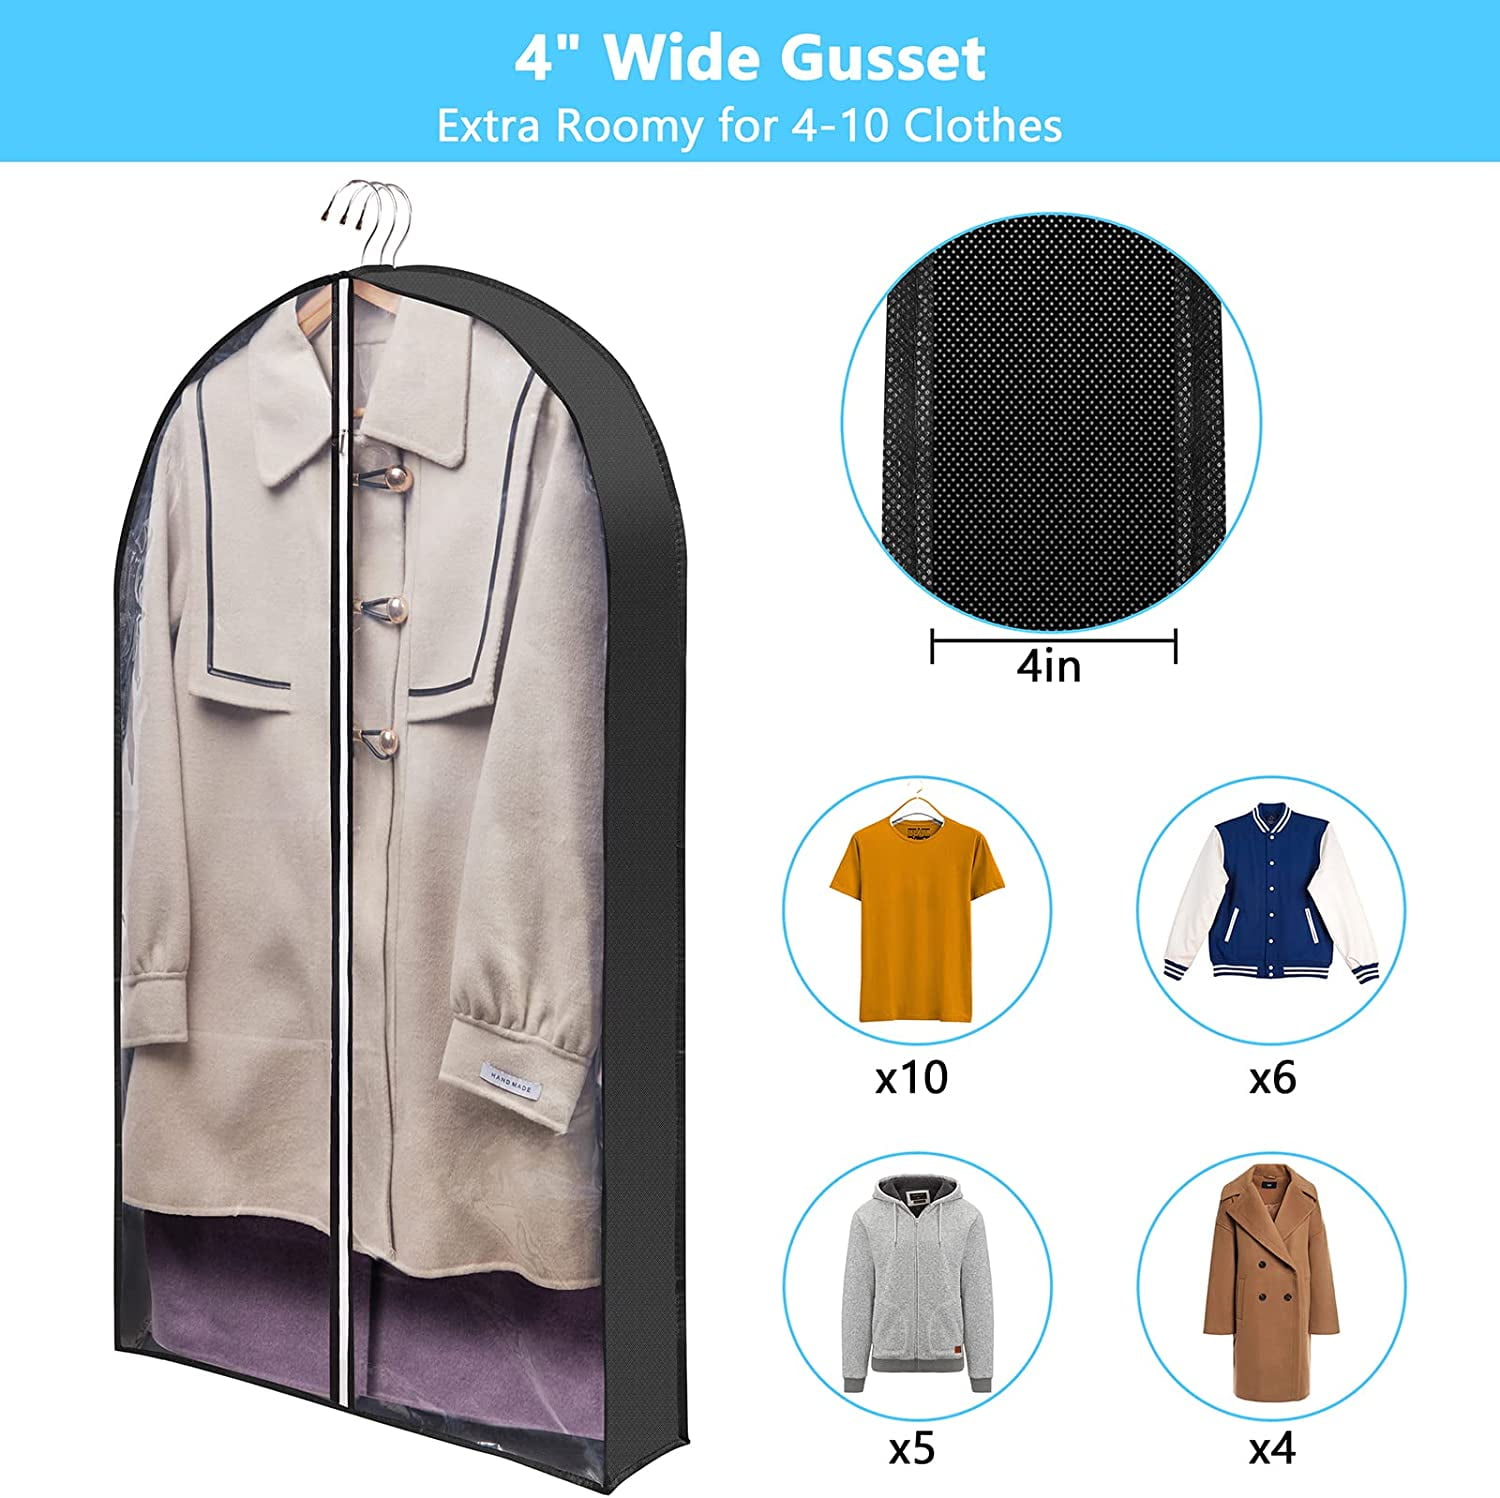 40 Garment Bags with 6 Pockets, Clear Clothes Covers with 4 Gussetes for  Hanging Clothes Closet Storage, Breathable Protector for Suits Coat,  Jacket, Sweater, Shirts, 3 Packs : : Home & Kitchen